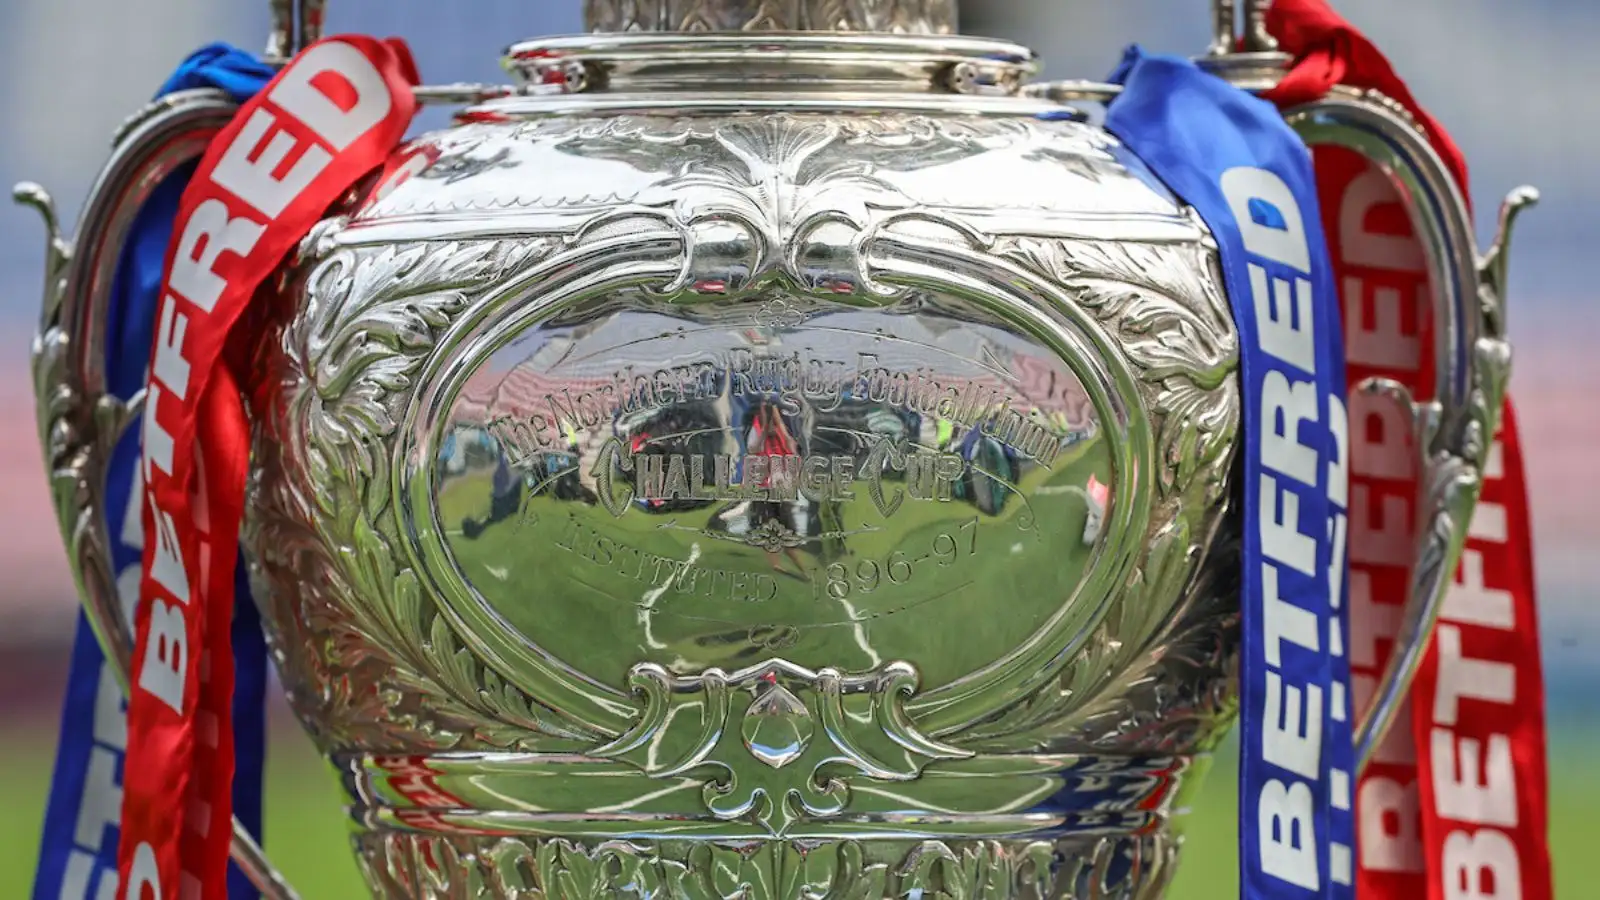 Challenge Cup finals date moved as Wembley Stadium confirmed for next two years